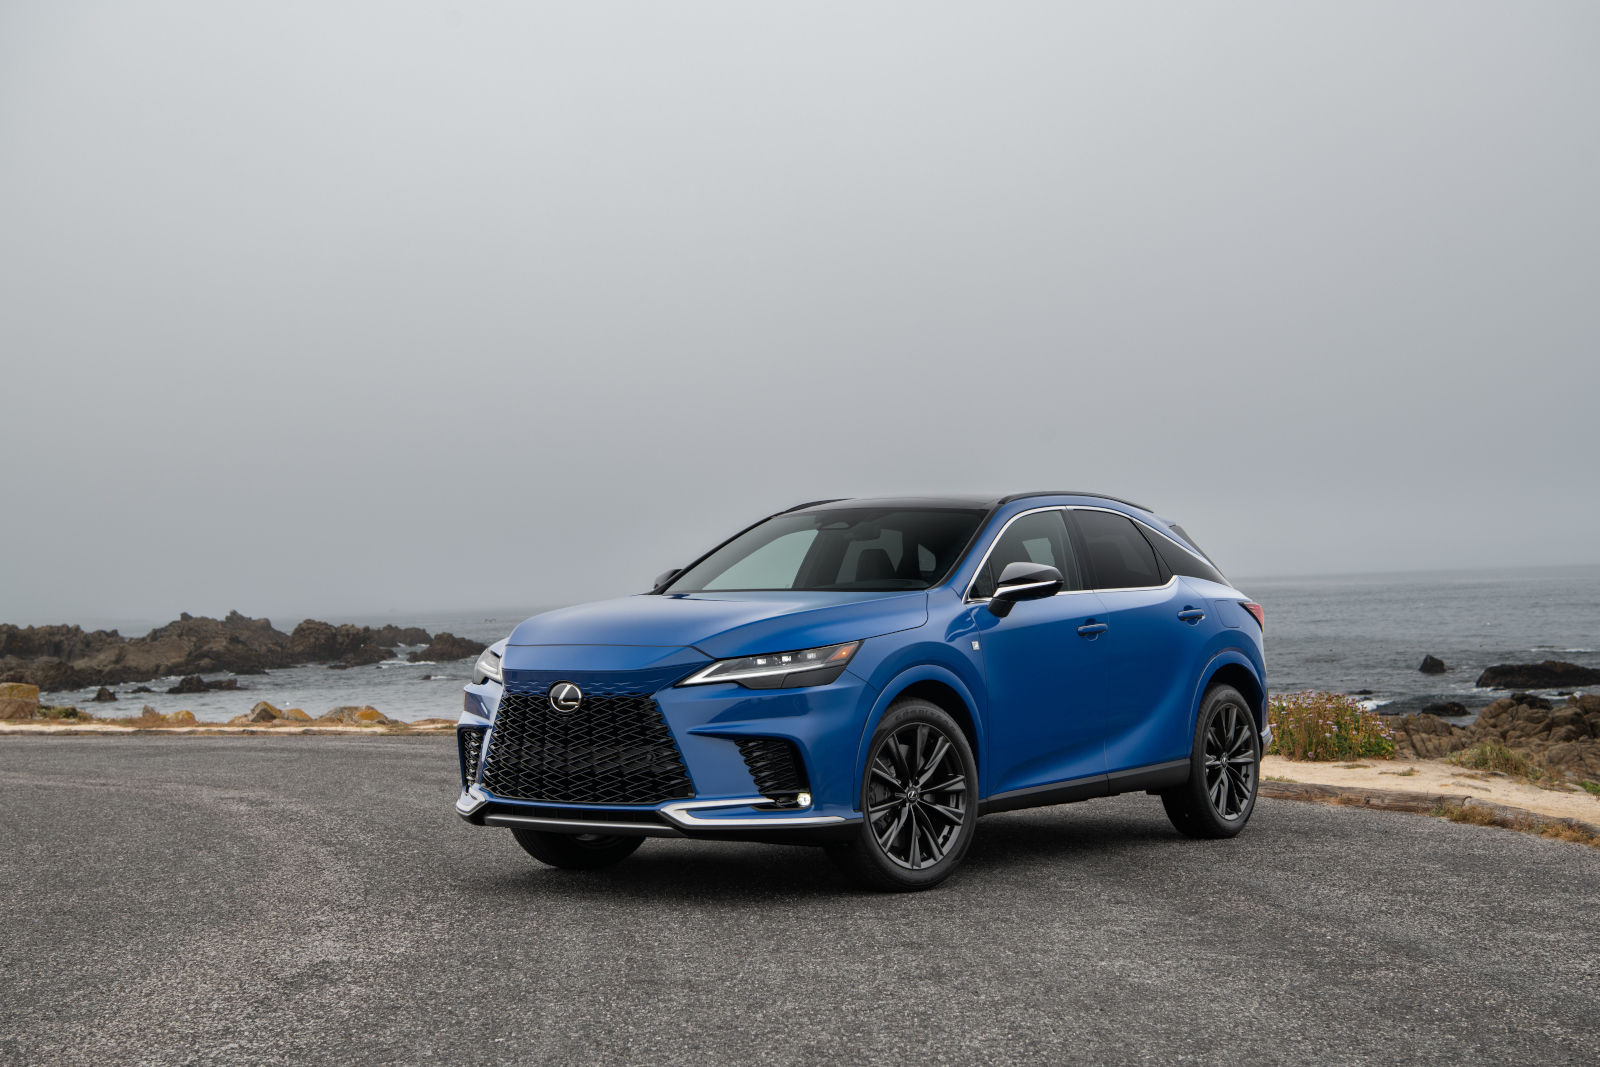 Why Should You Choose the 2023 Lexus RX over the BMW X5?